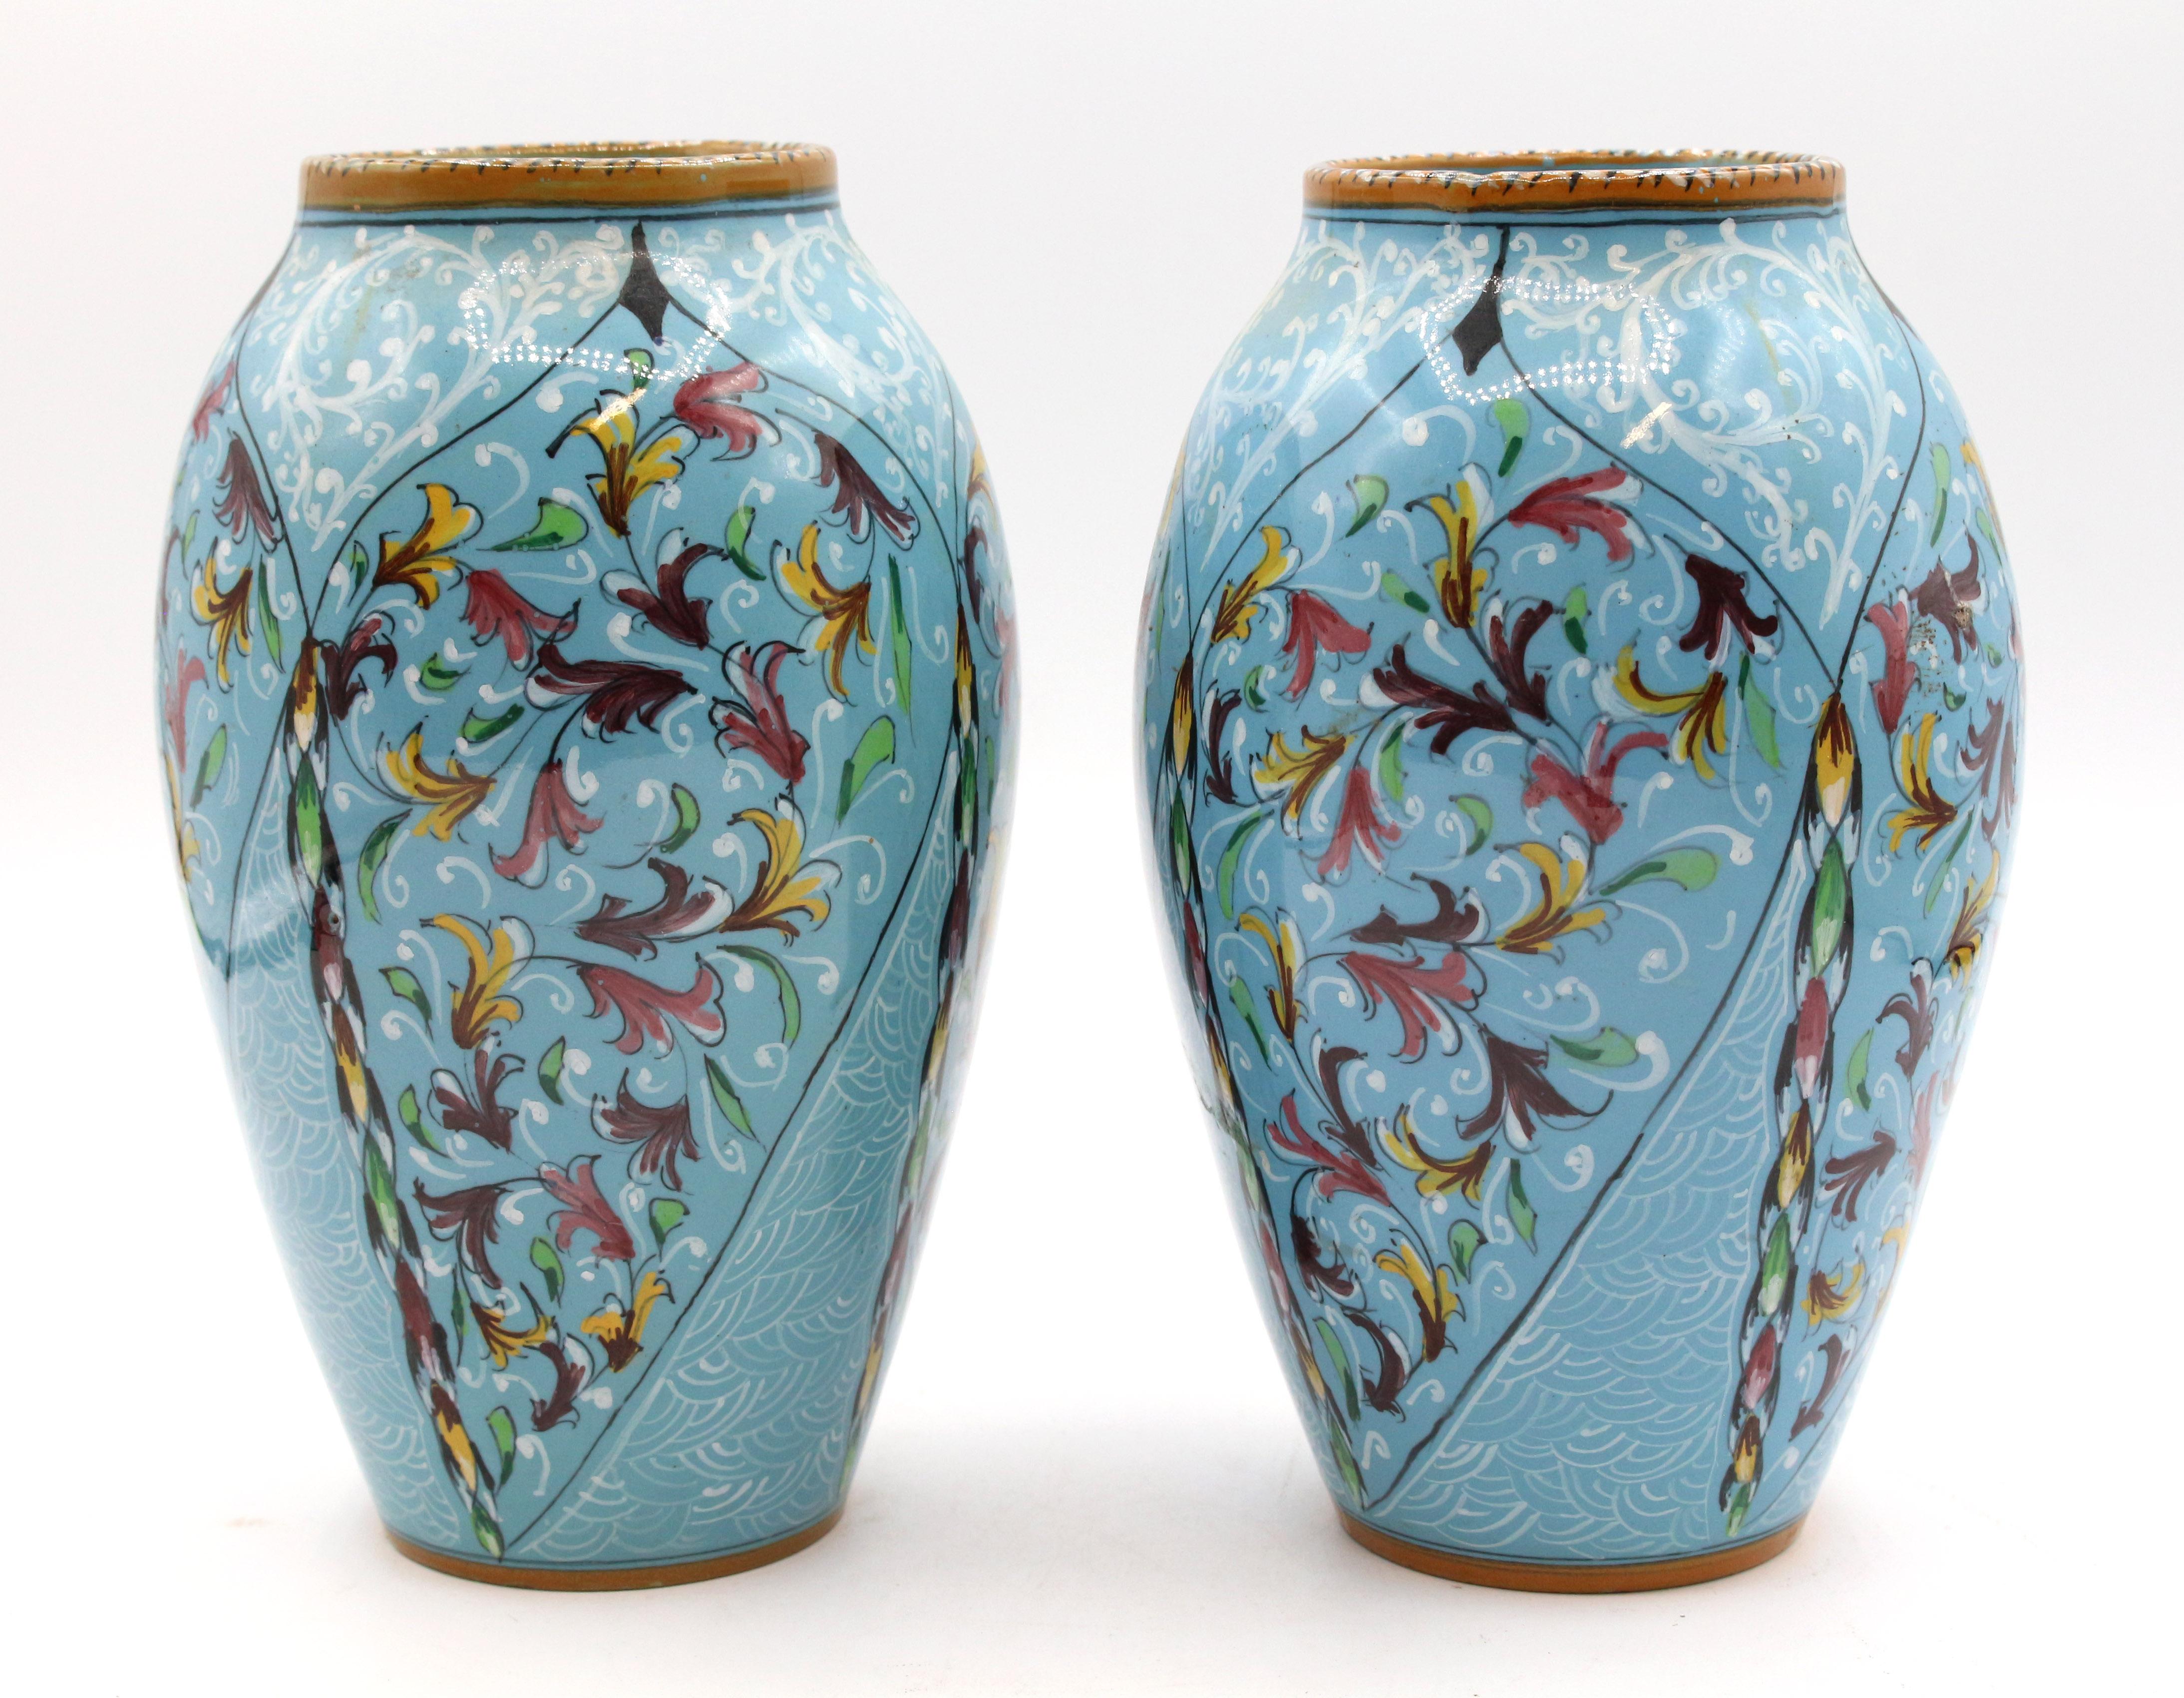 1900-1920s pair of majolica vases by Mengaroni, Pesaro, Italy. Decorated in the Renaissance manner with white tracery & multicolored florets on light blue ground with mustard borders. Ferruccio Mengaroni was crushed to death by his massive majolica